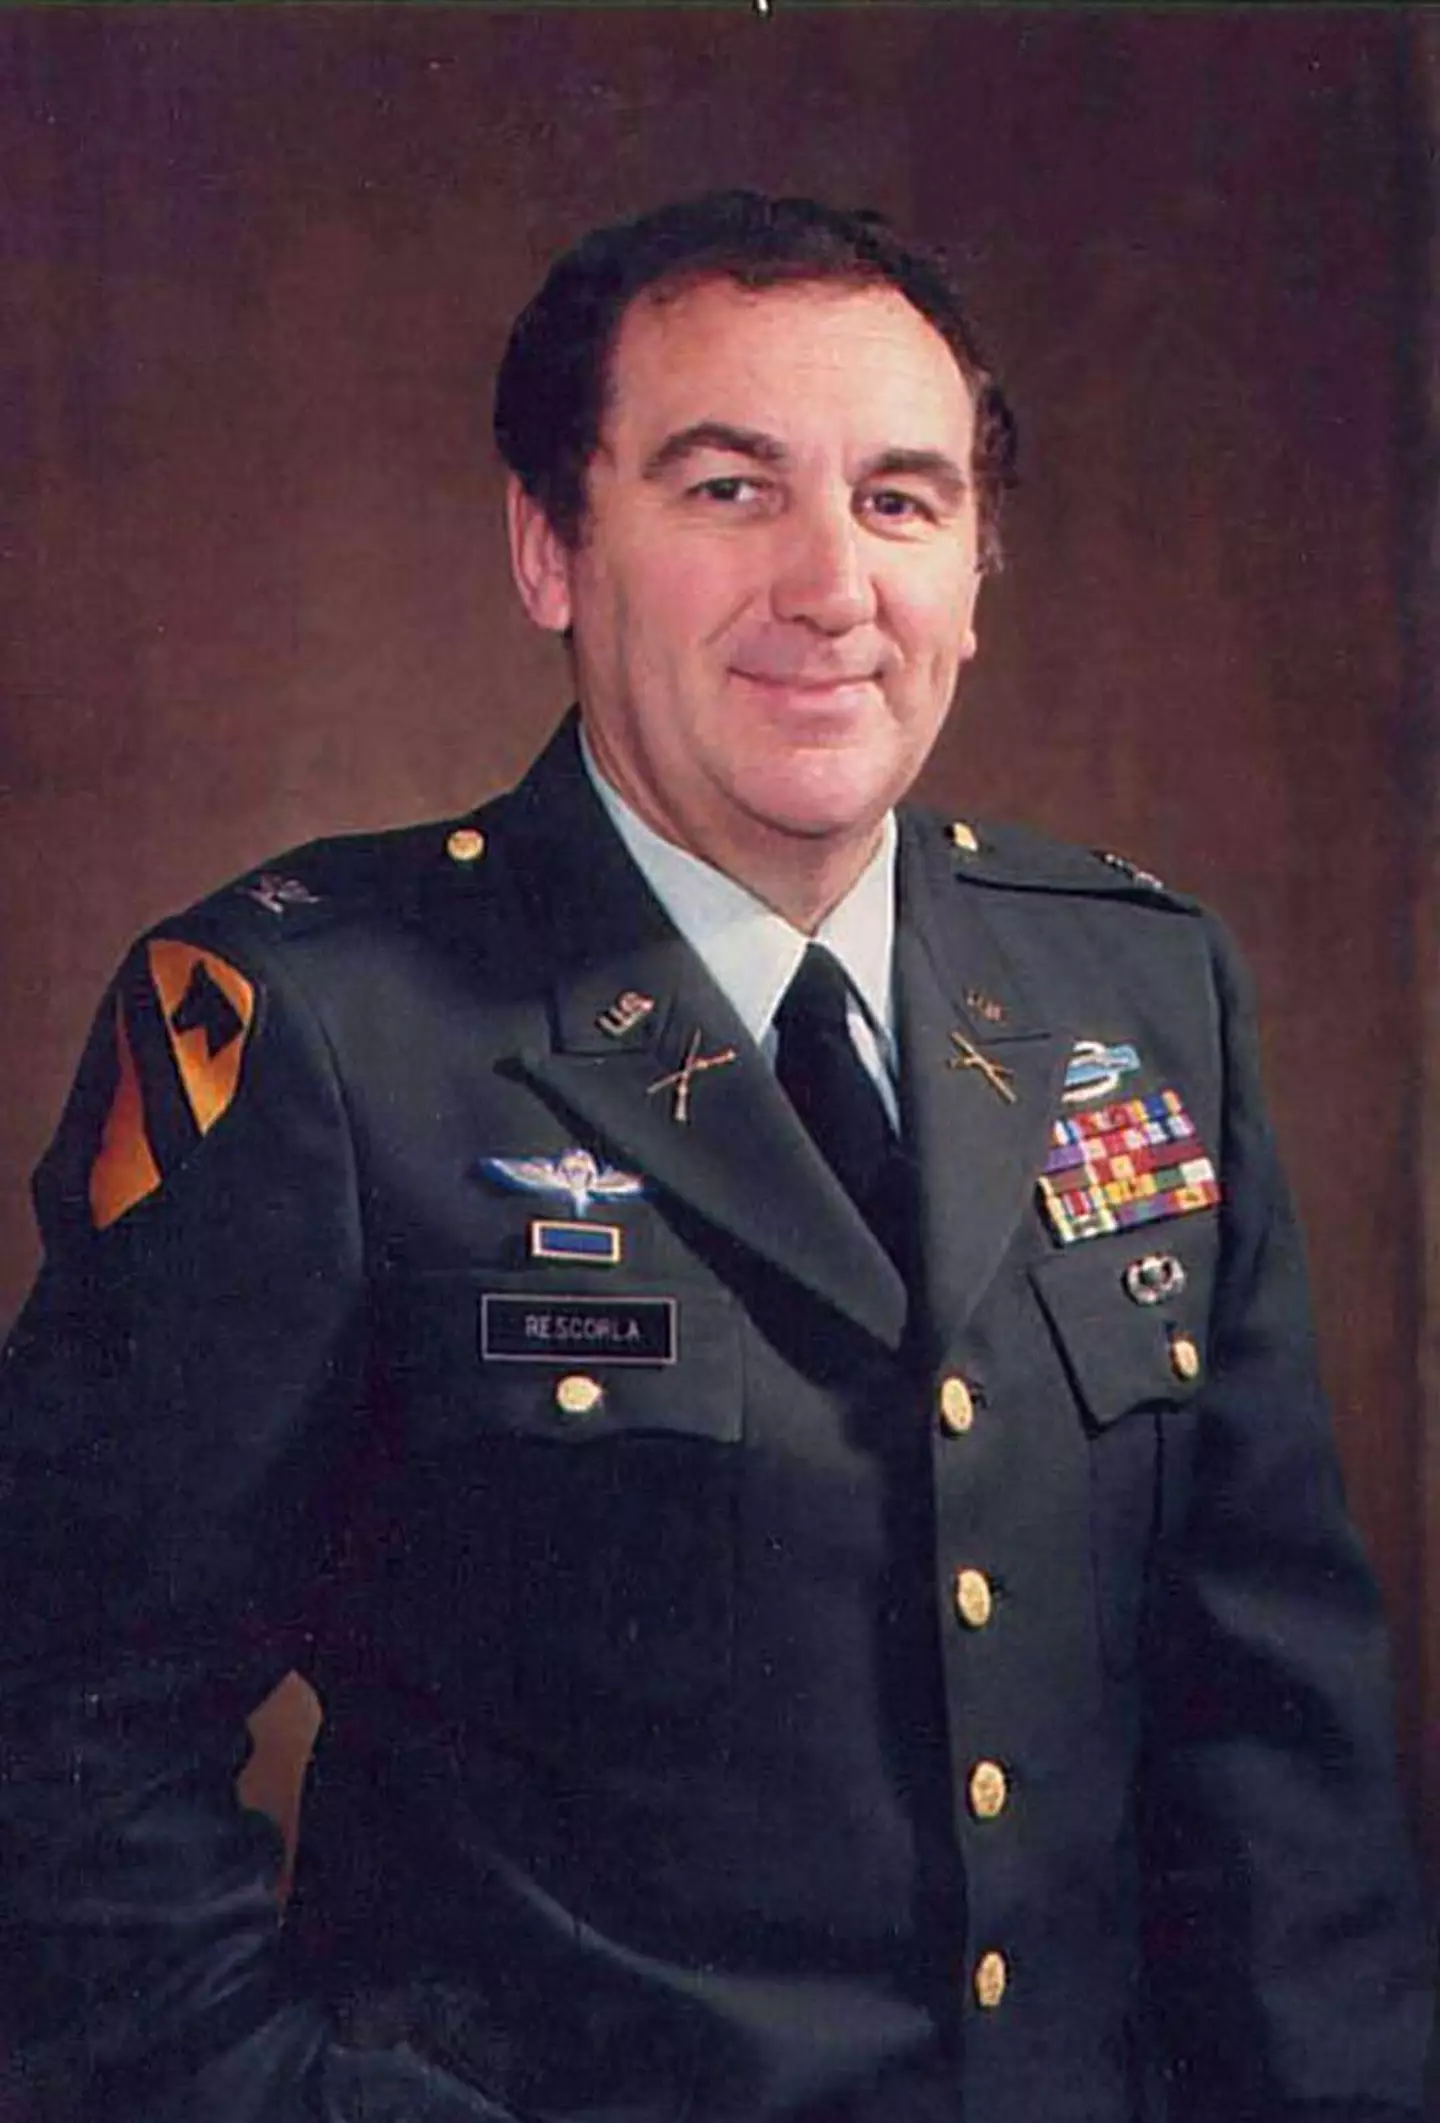 Ex military head of secrutiy Rick Rescorla died rescuing people inside the building (